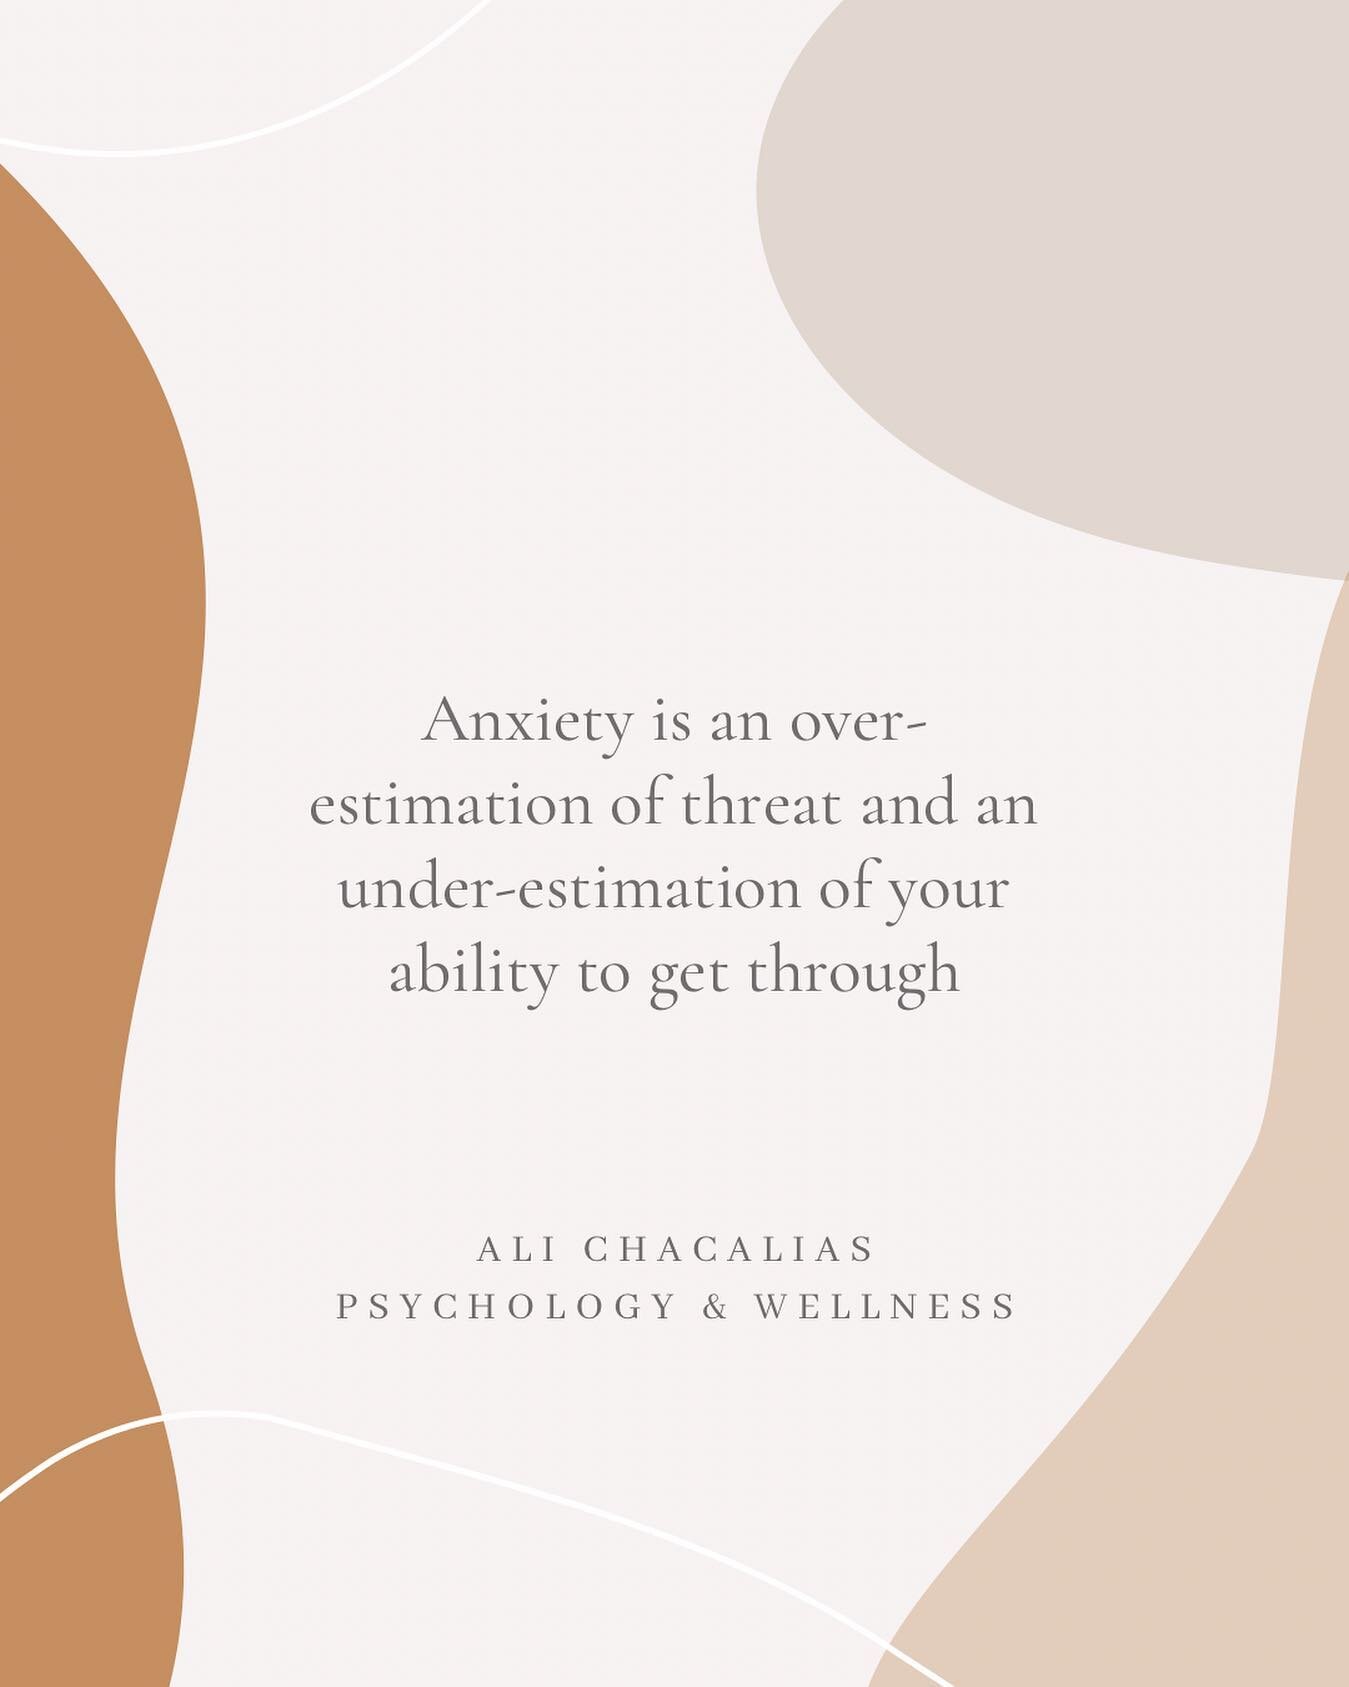 When anxiety consistently comes up as an issue for us, it is just this: an over-estimation of threat and an underestimation of our ability to get through. 

For everyone that goes through this, I hear you, I see you. I know it&rsquo;s so hard to figh